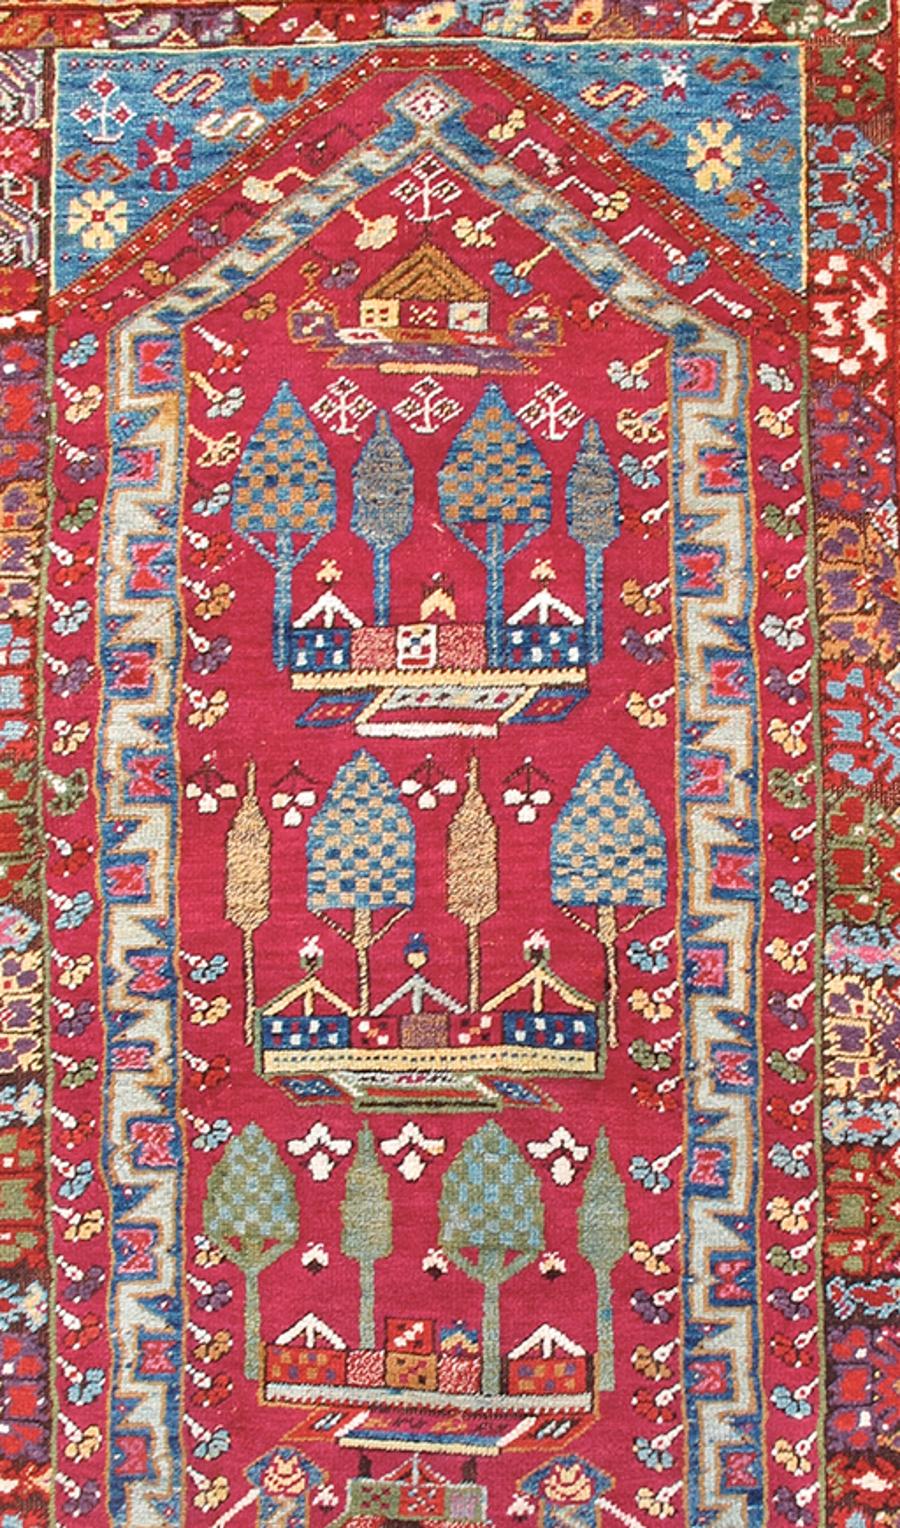 This colorful prayer rug from the area of Kirshehir in northern Anatolia paints a repeat image of a courtyard planted with cypress trees. A prayer niche—or mihrab—is outlined in blue with geometric zig-zags, most probably an abstraction of a